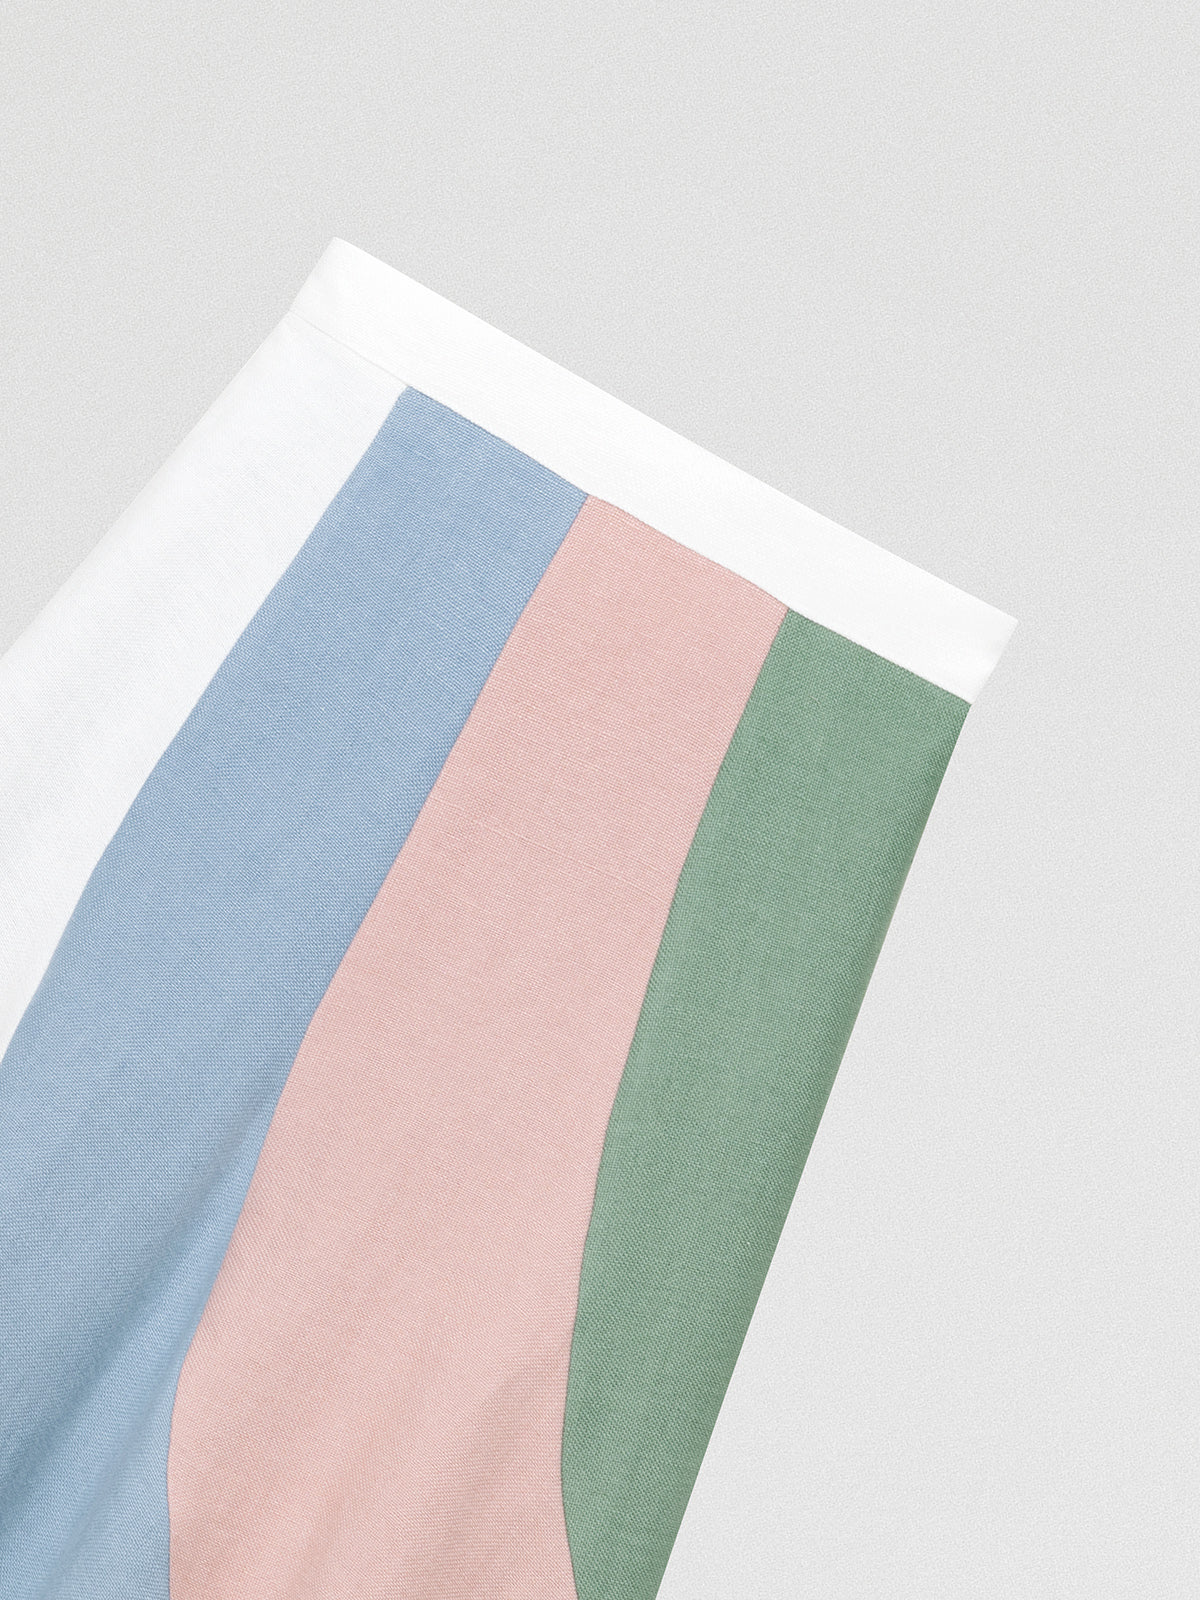 Flared linen midi skirt with asymmetric print in baby pink, baby blue, green and white.